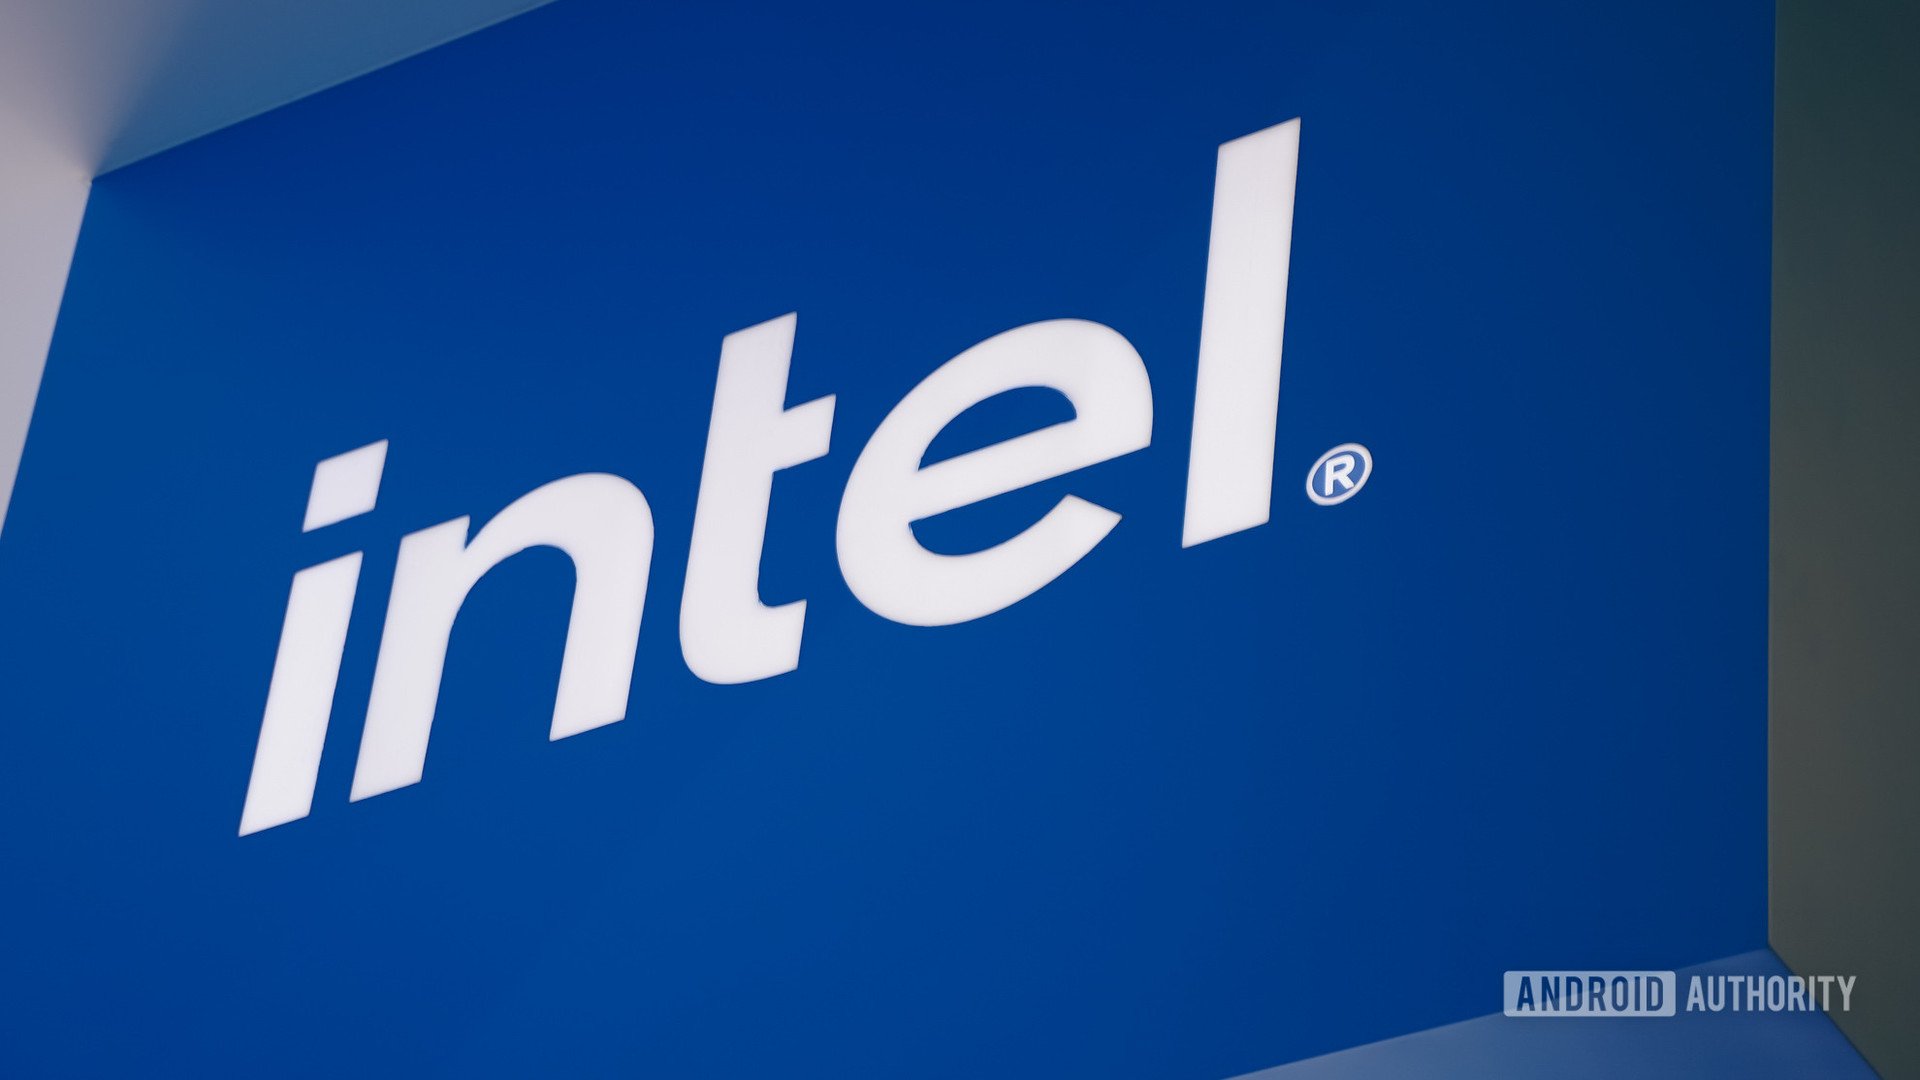 Intel wants to help make Windows play friendly with both Android and iOS